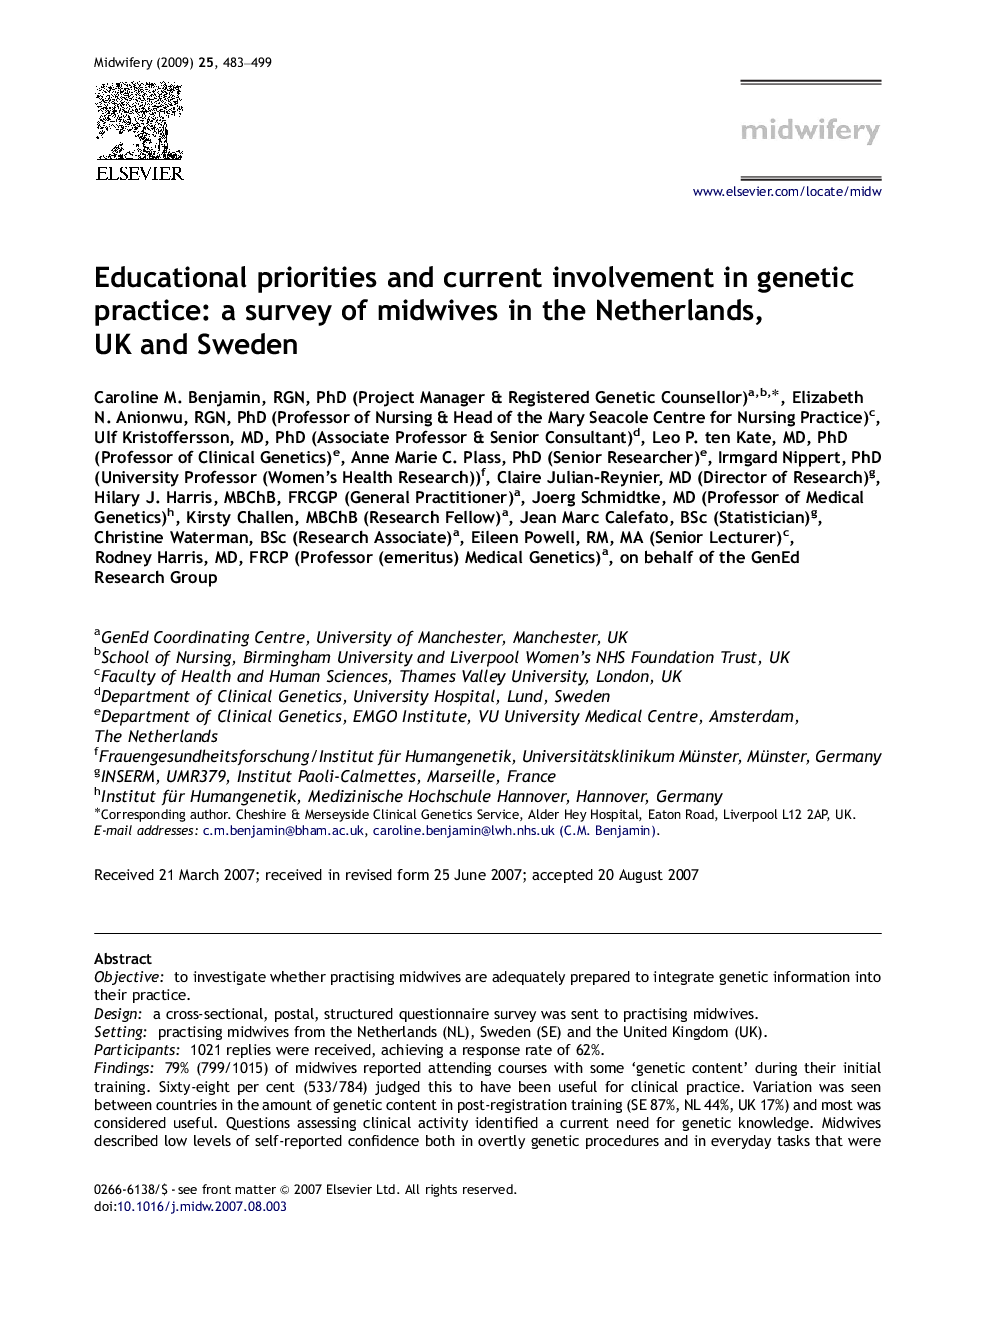 Educational priorities and current involvement in genetic practice: a survey of midwives in the Netherlands, UK and Sweden